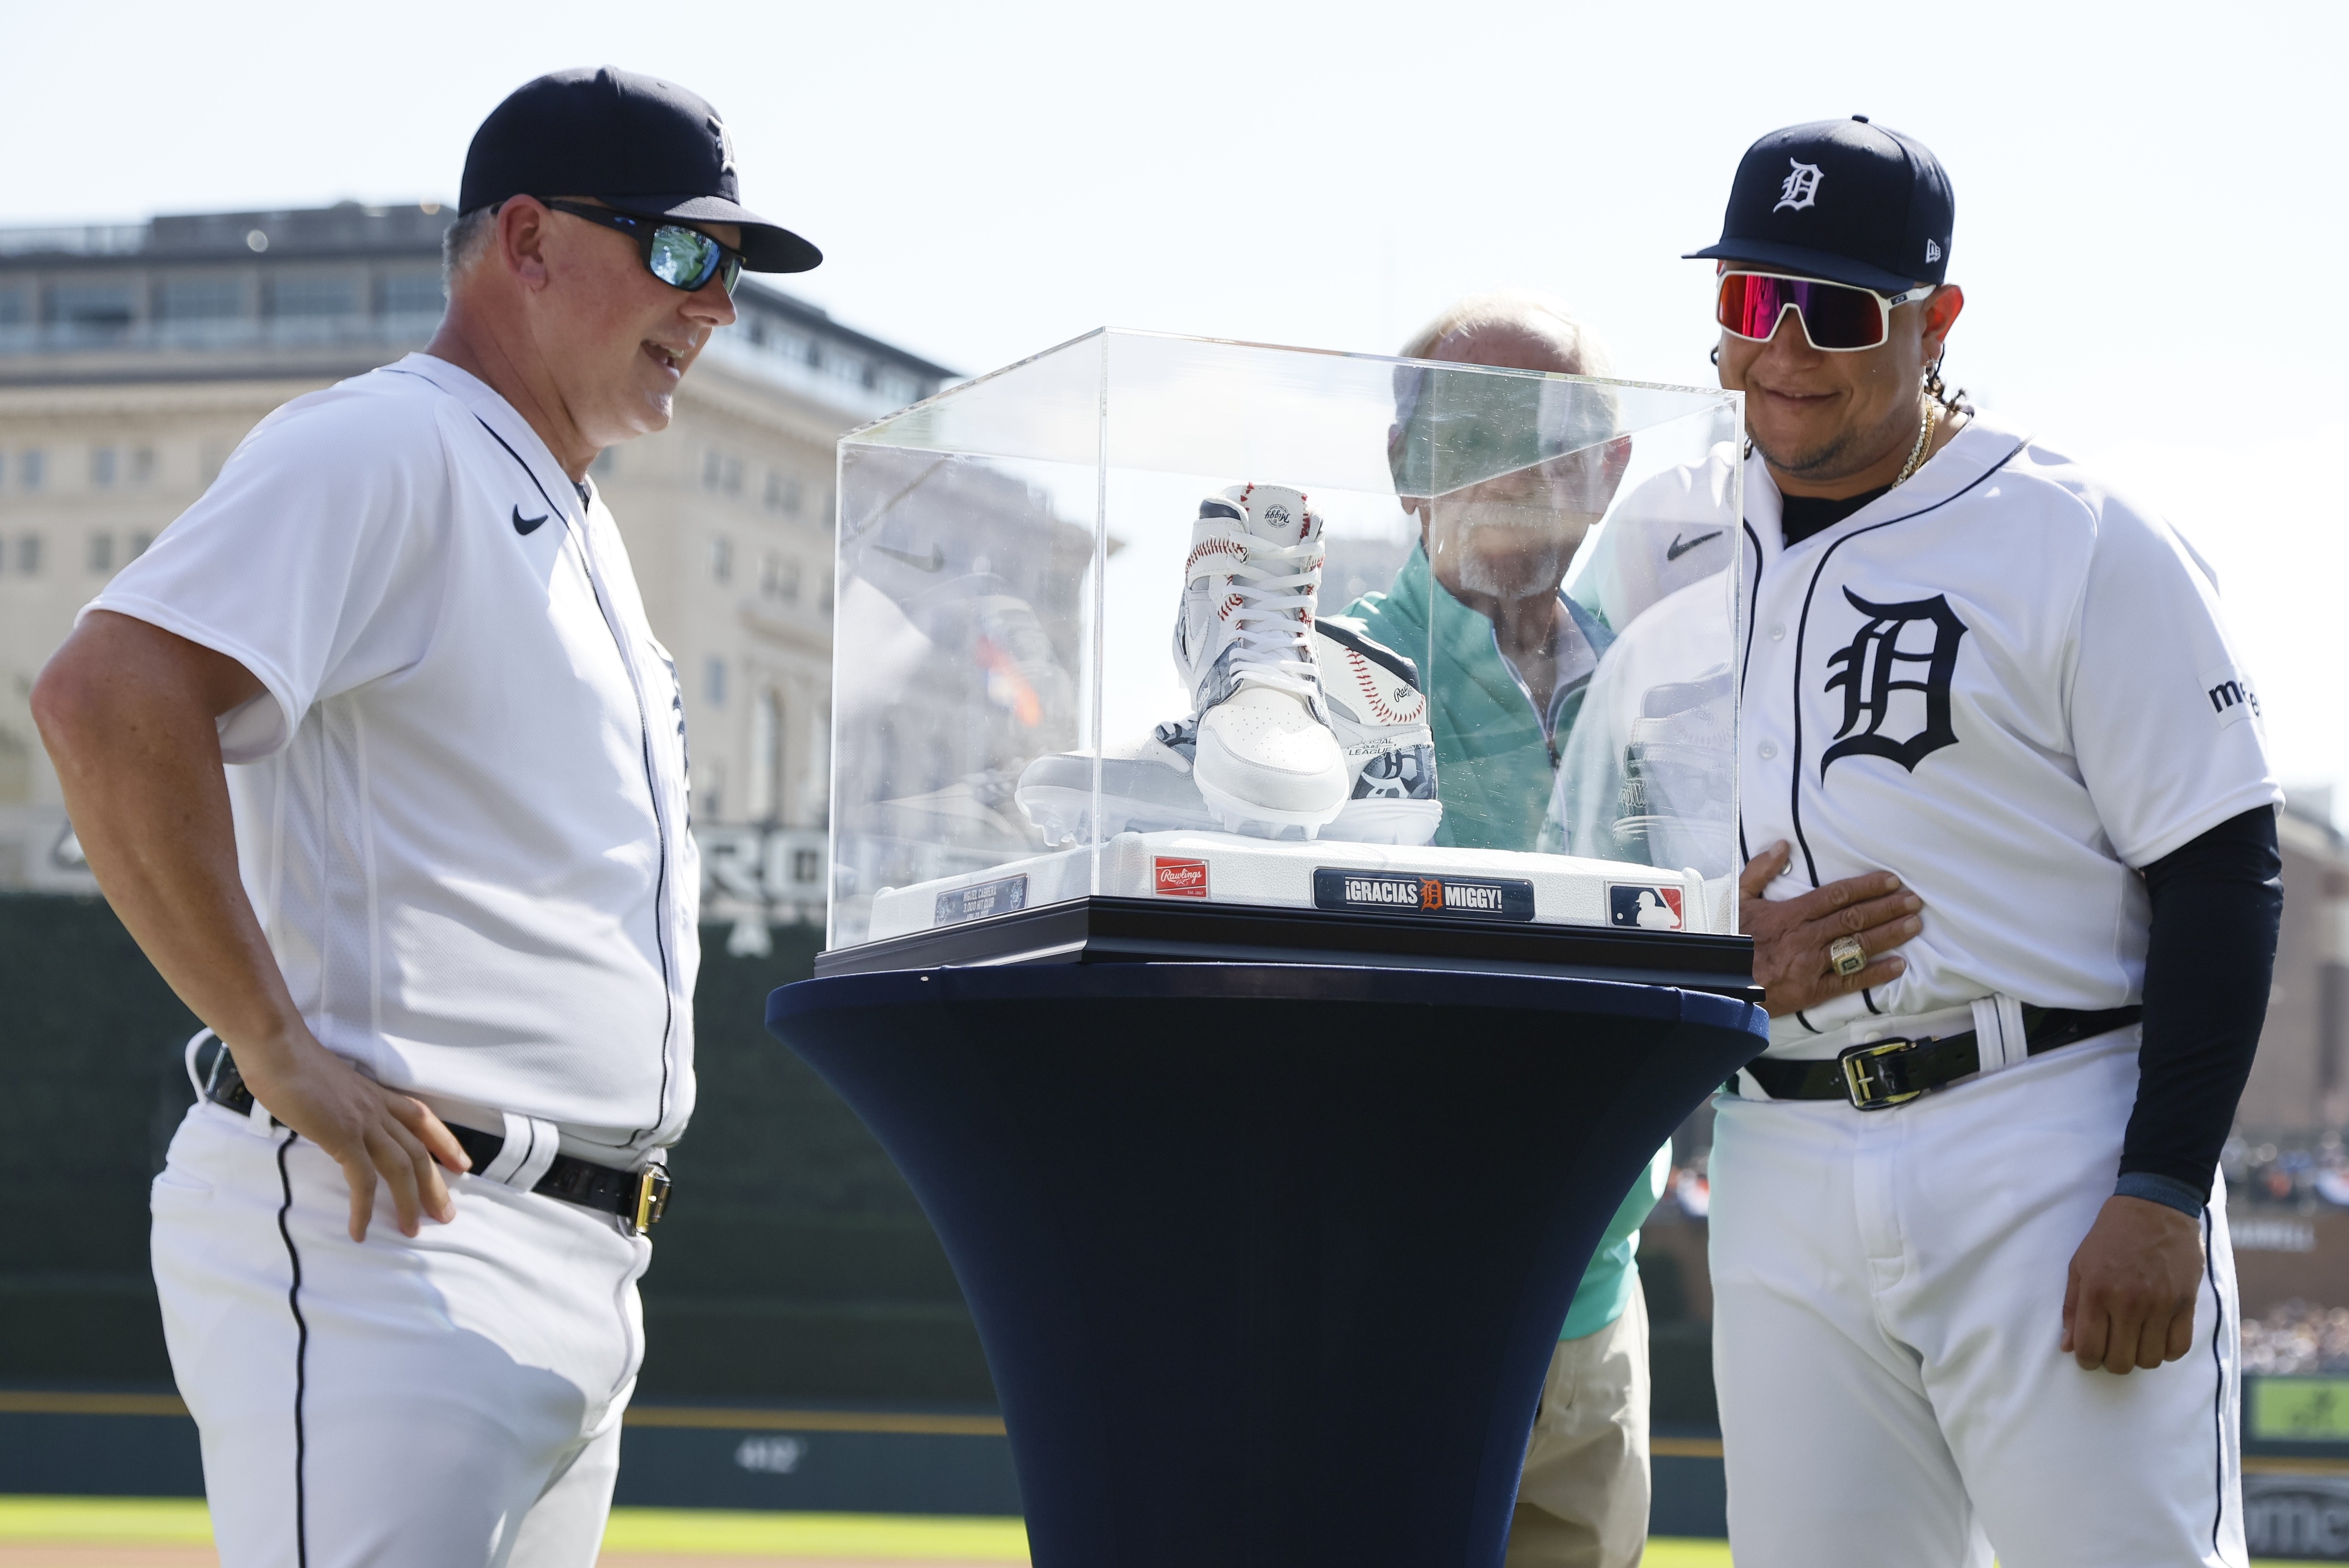 Cabrera gets to 2,999 hits in Tigers' 5-3 loss to Yankees